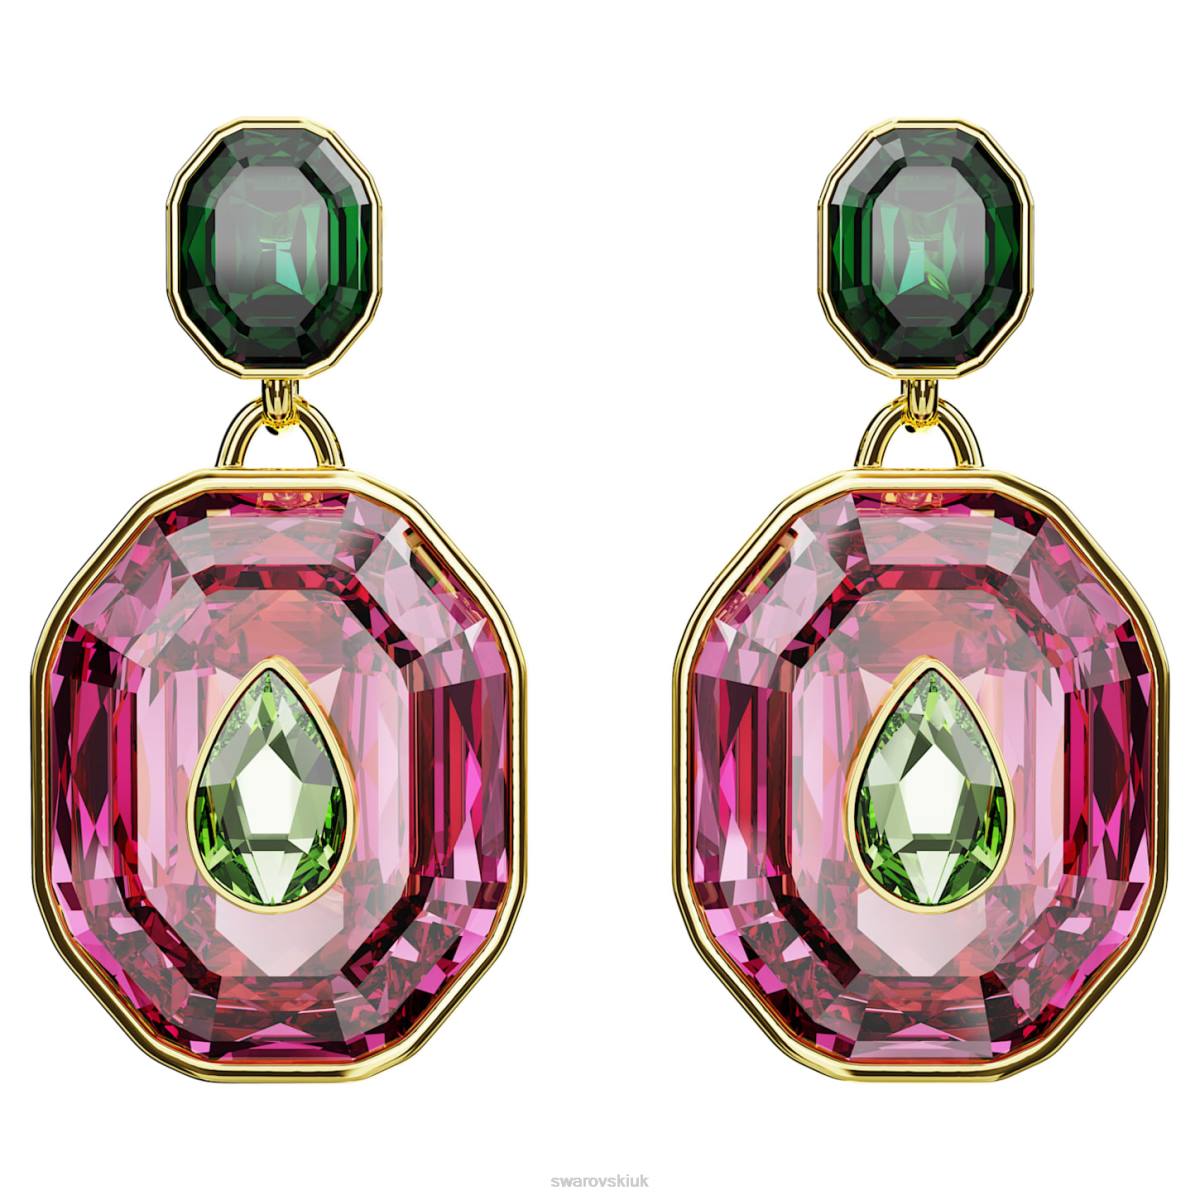 Jewelry Swarovski Chroma drop earrings Mixed cuts, Multicolored, Gold-tone plated 48JX853